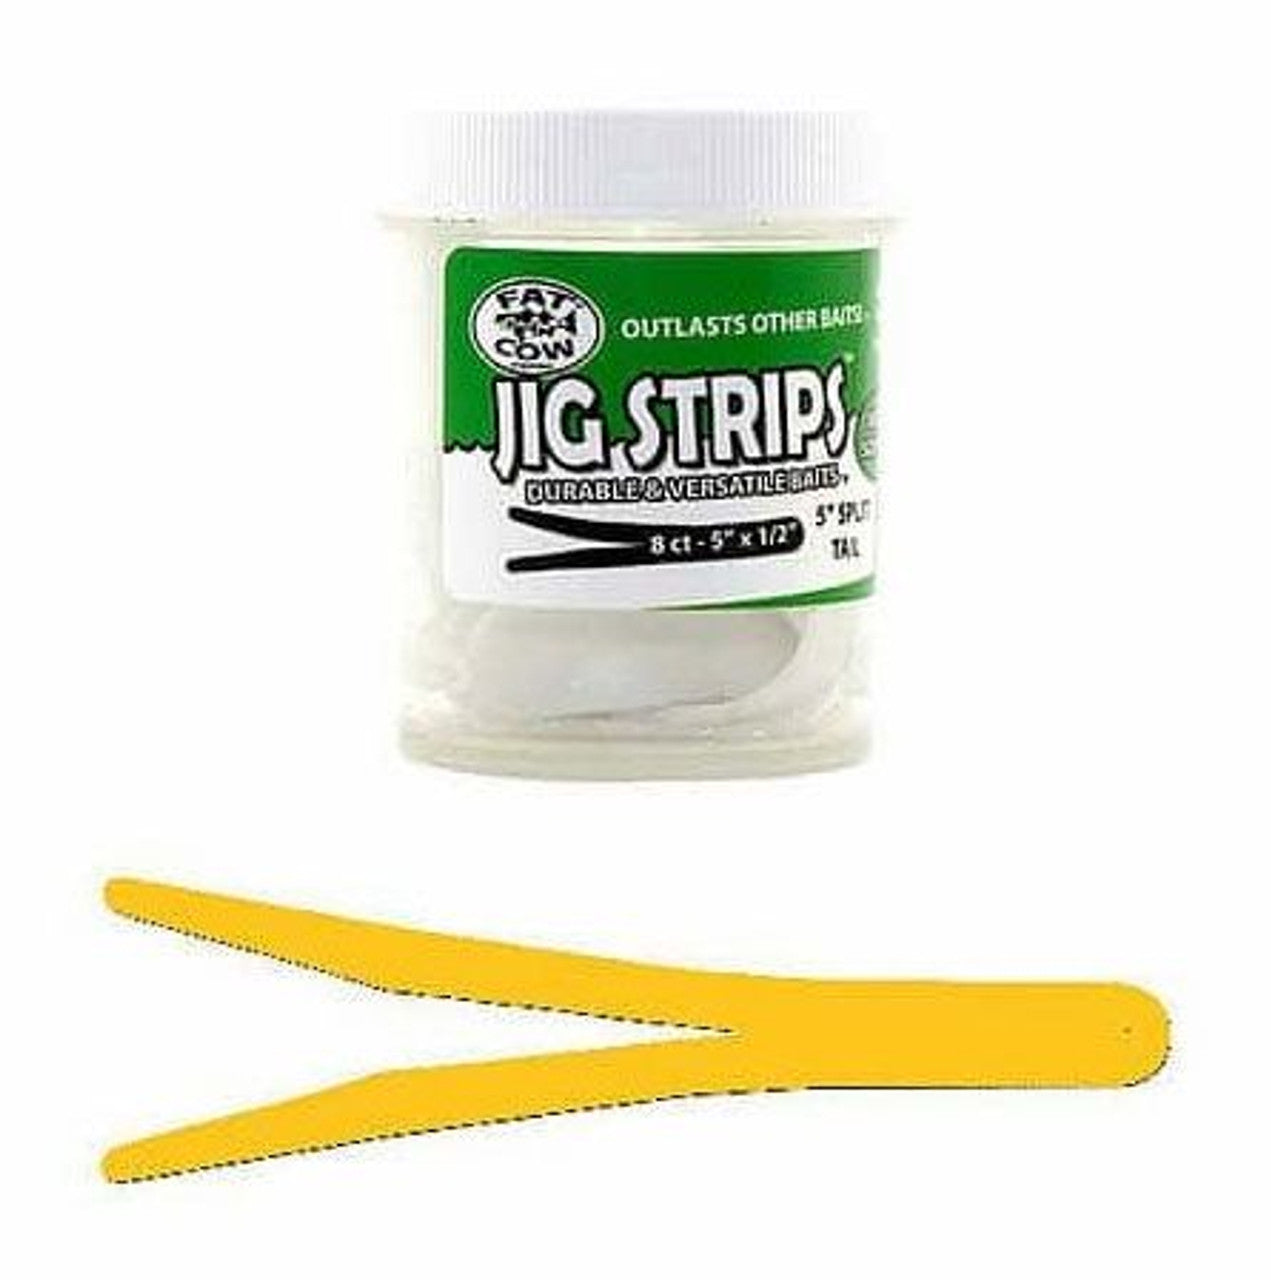 Fat Cow Fishing Jig Strips - Split Tail, 5" X 1/2", Scented